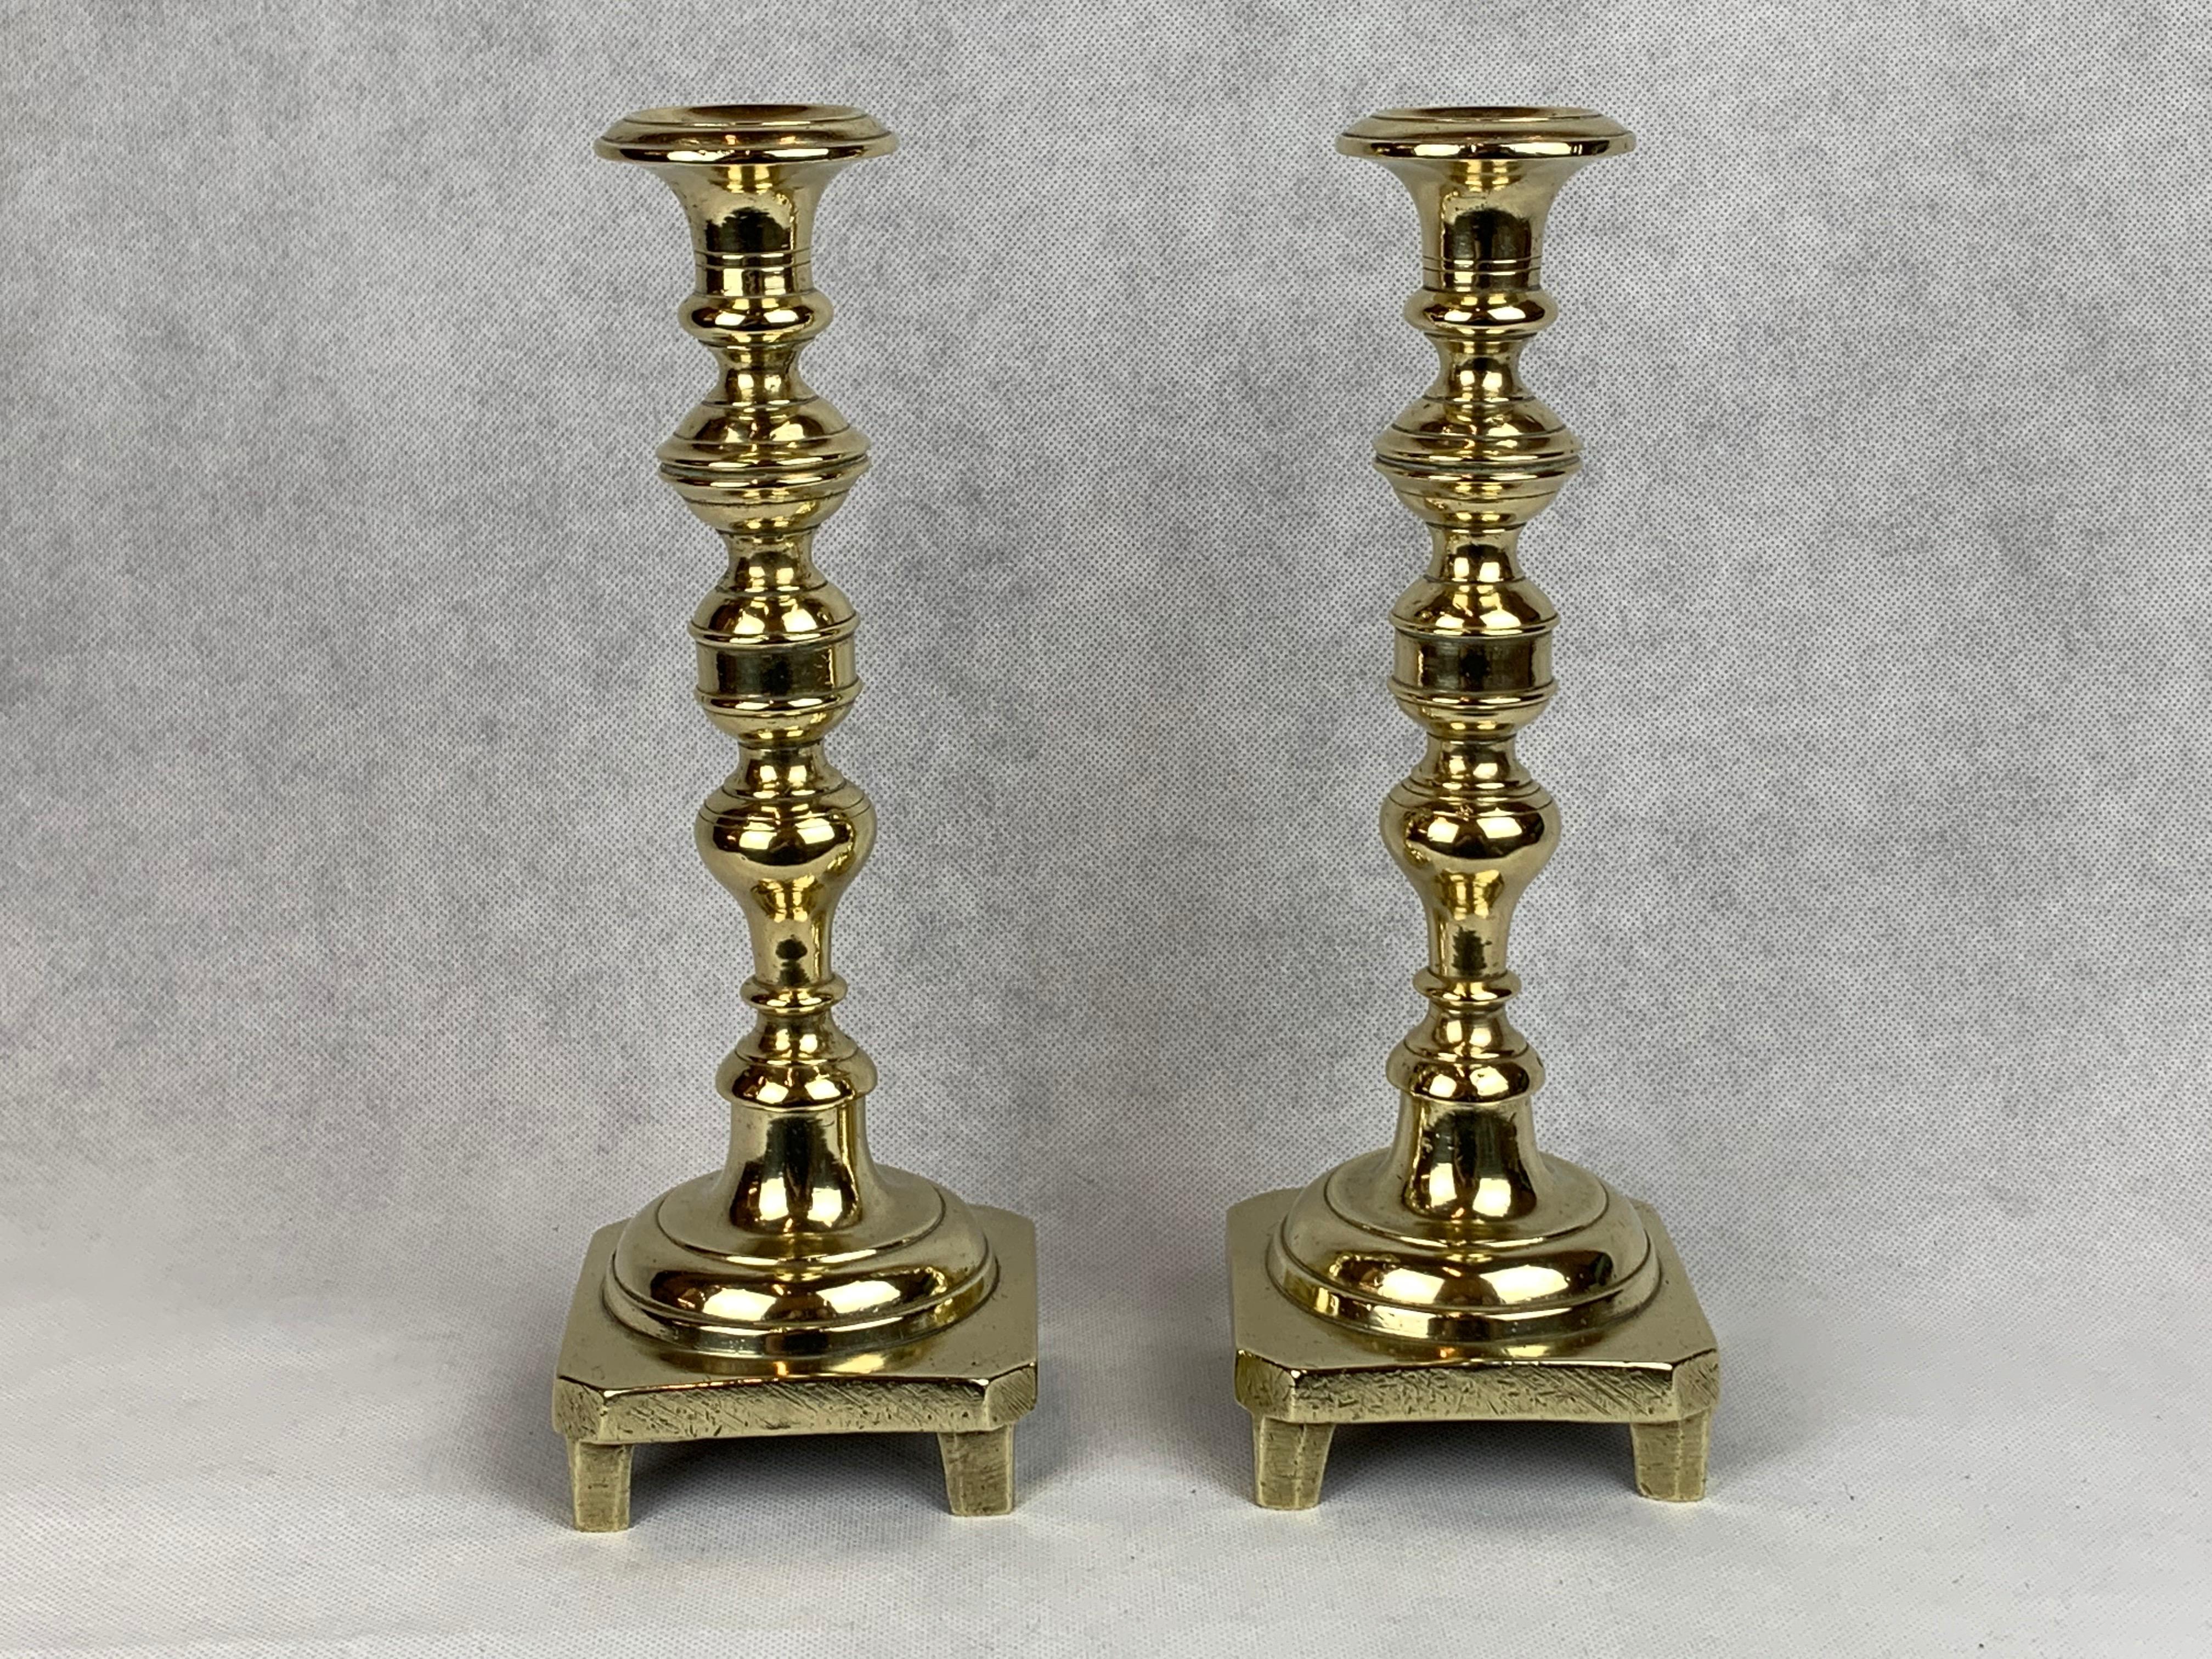 Russian A Pair of Solid Brass Footed Candlesticks with Square Bases, Russia, 19th c. For Sale